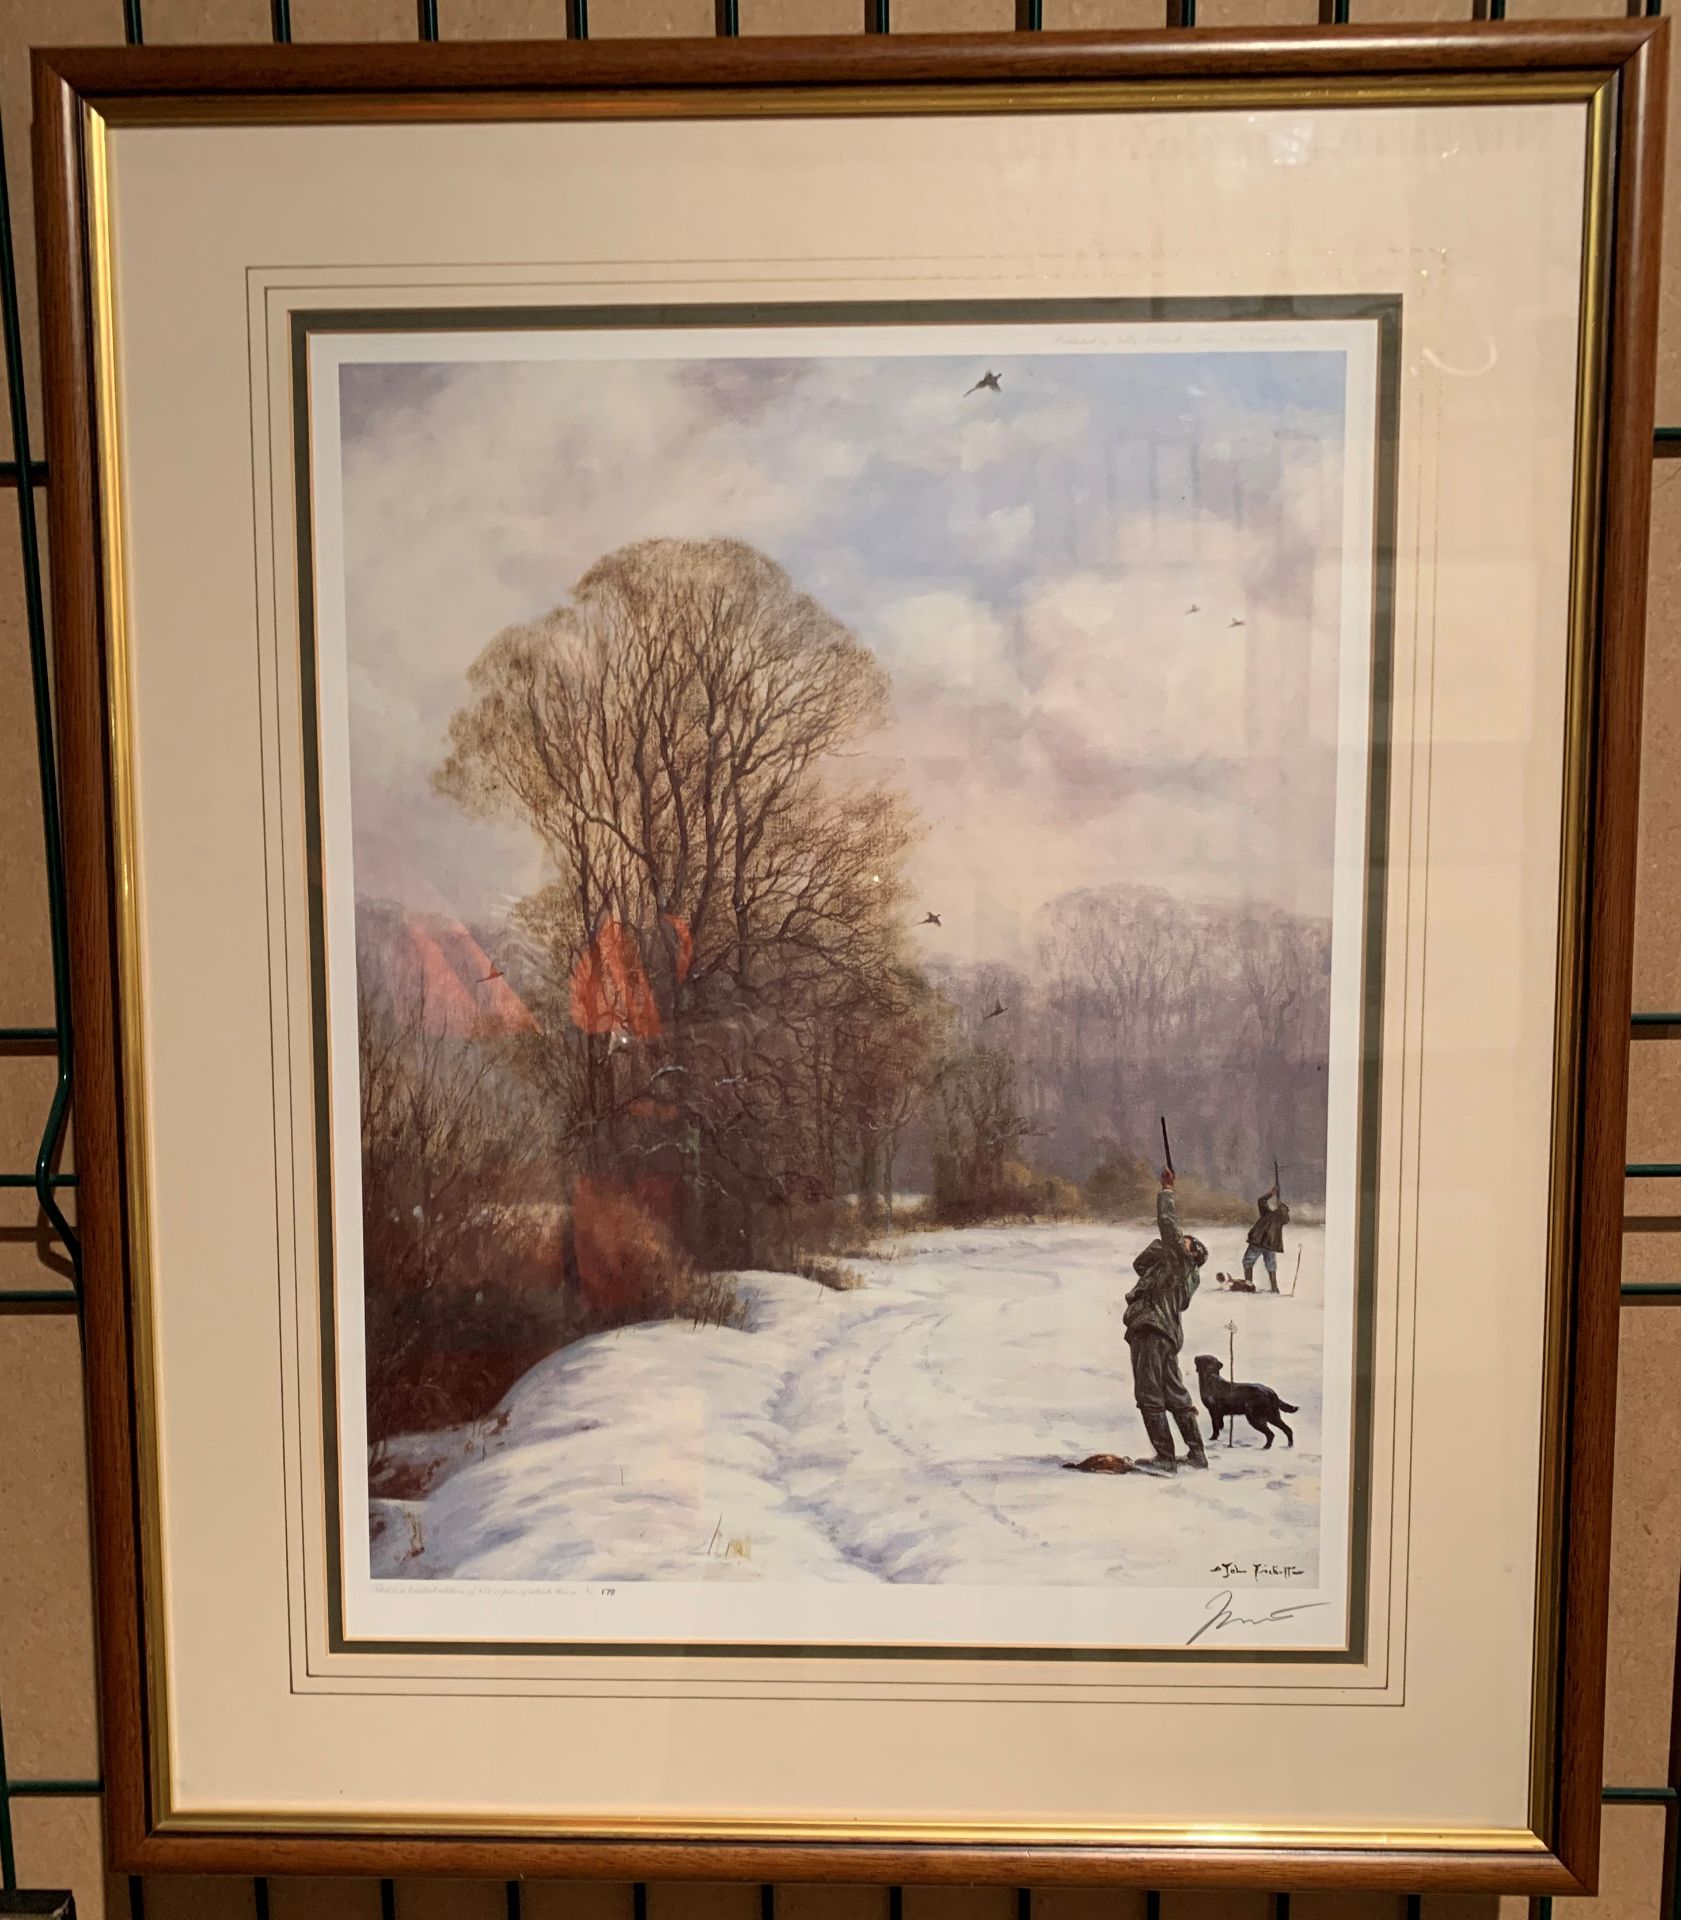 John Trickett framed Limited Edition print 'Winter Shoot' 45 x 35cm signed in pencil by the artist